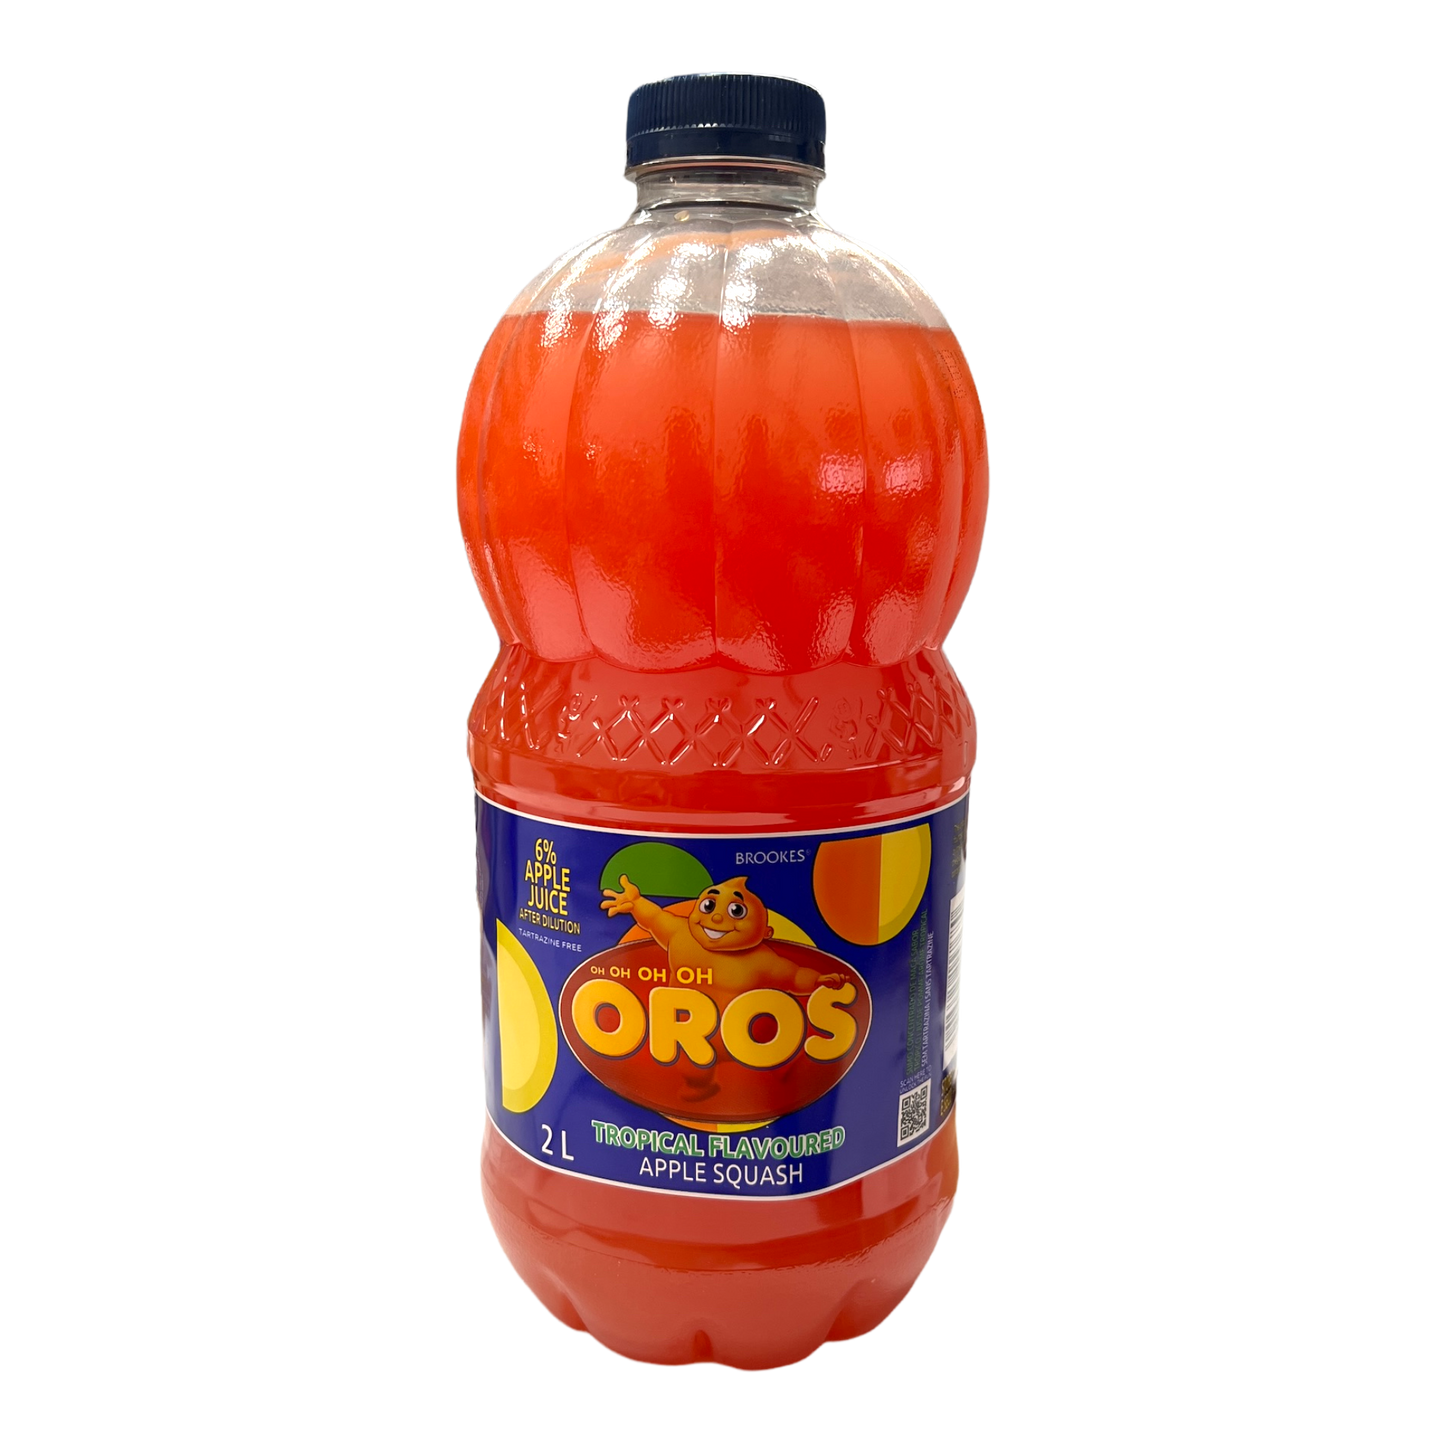 Oros Tropical Flavoured Apple Squash 2L [South African]